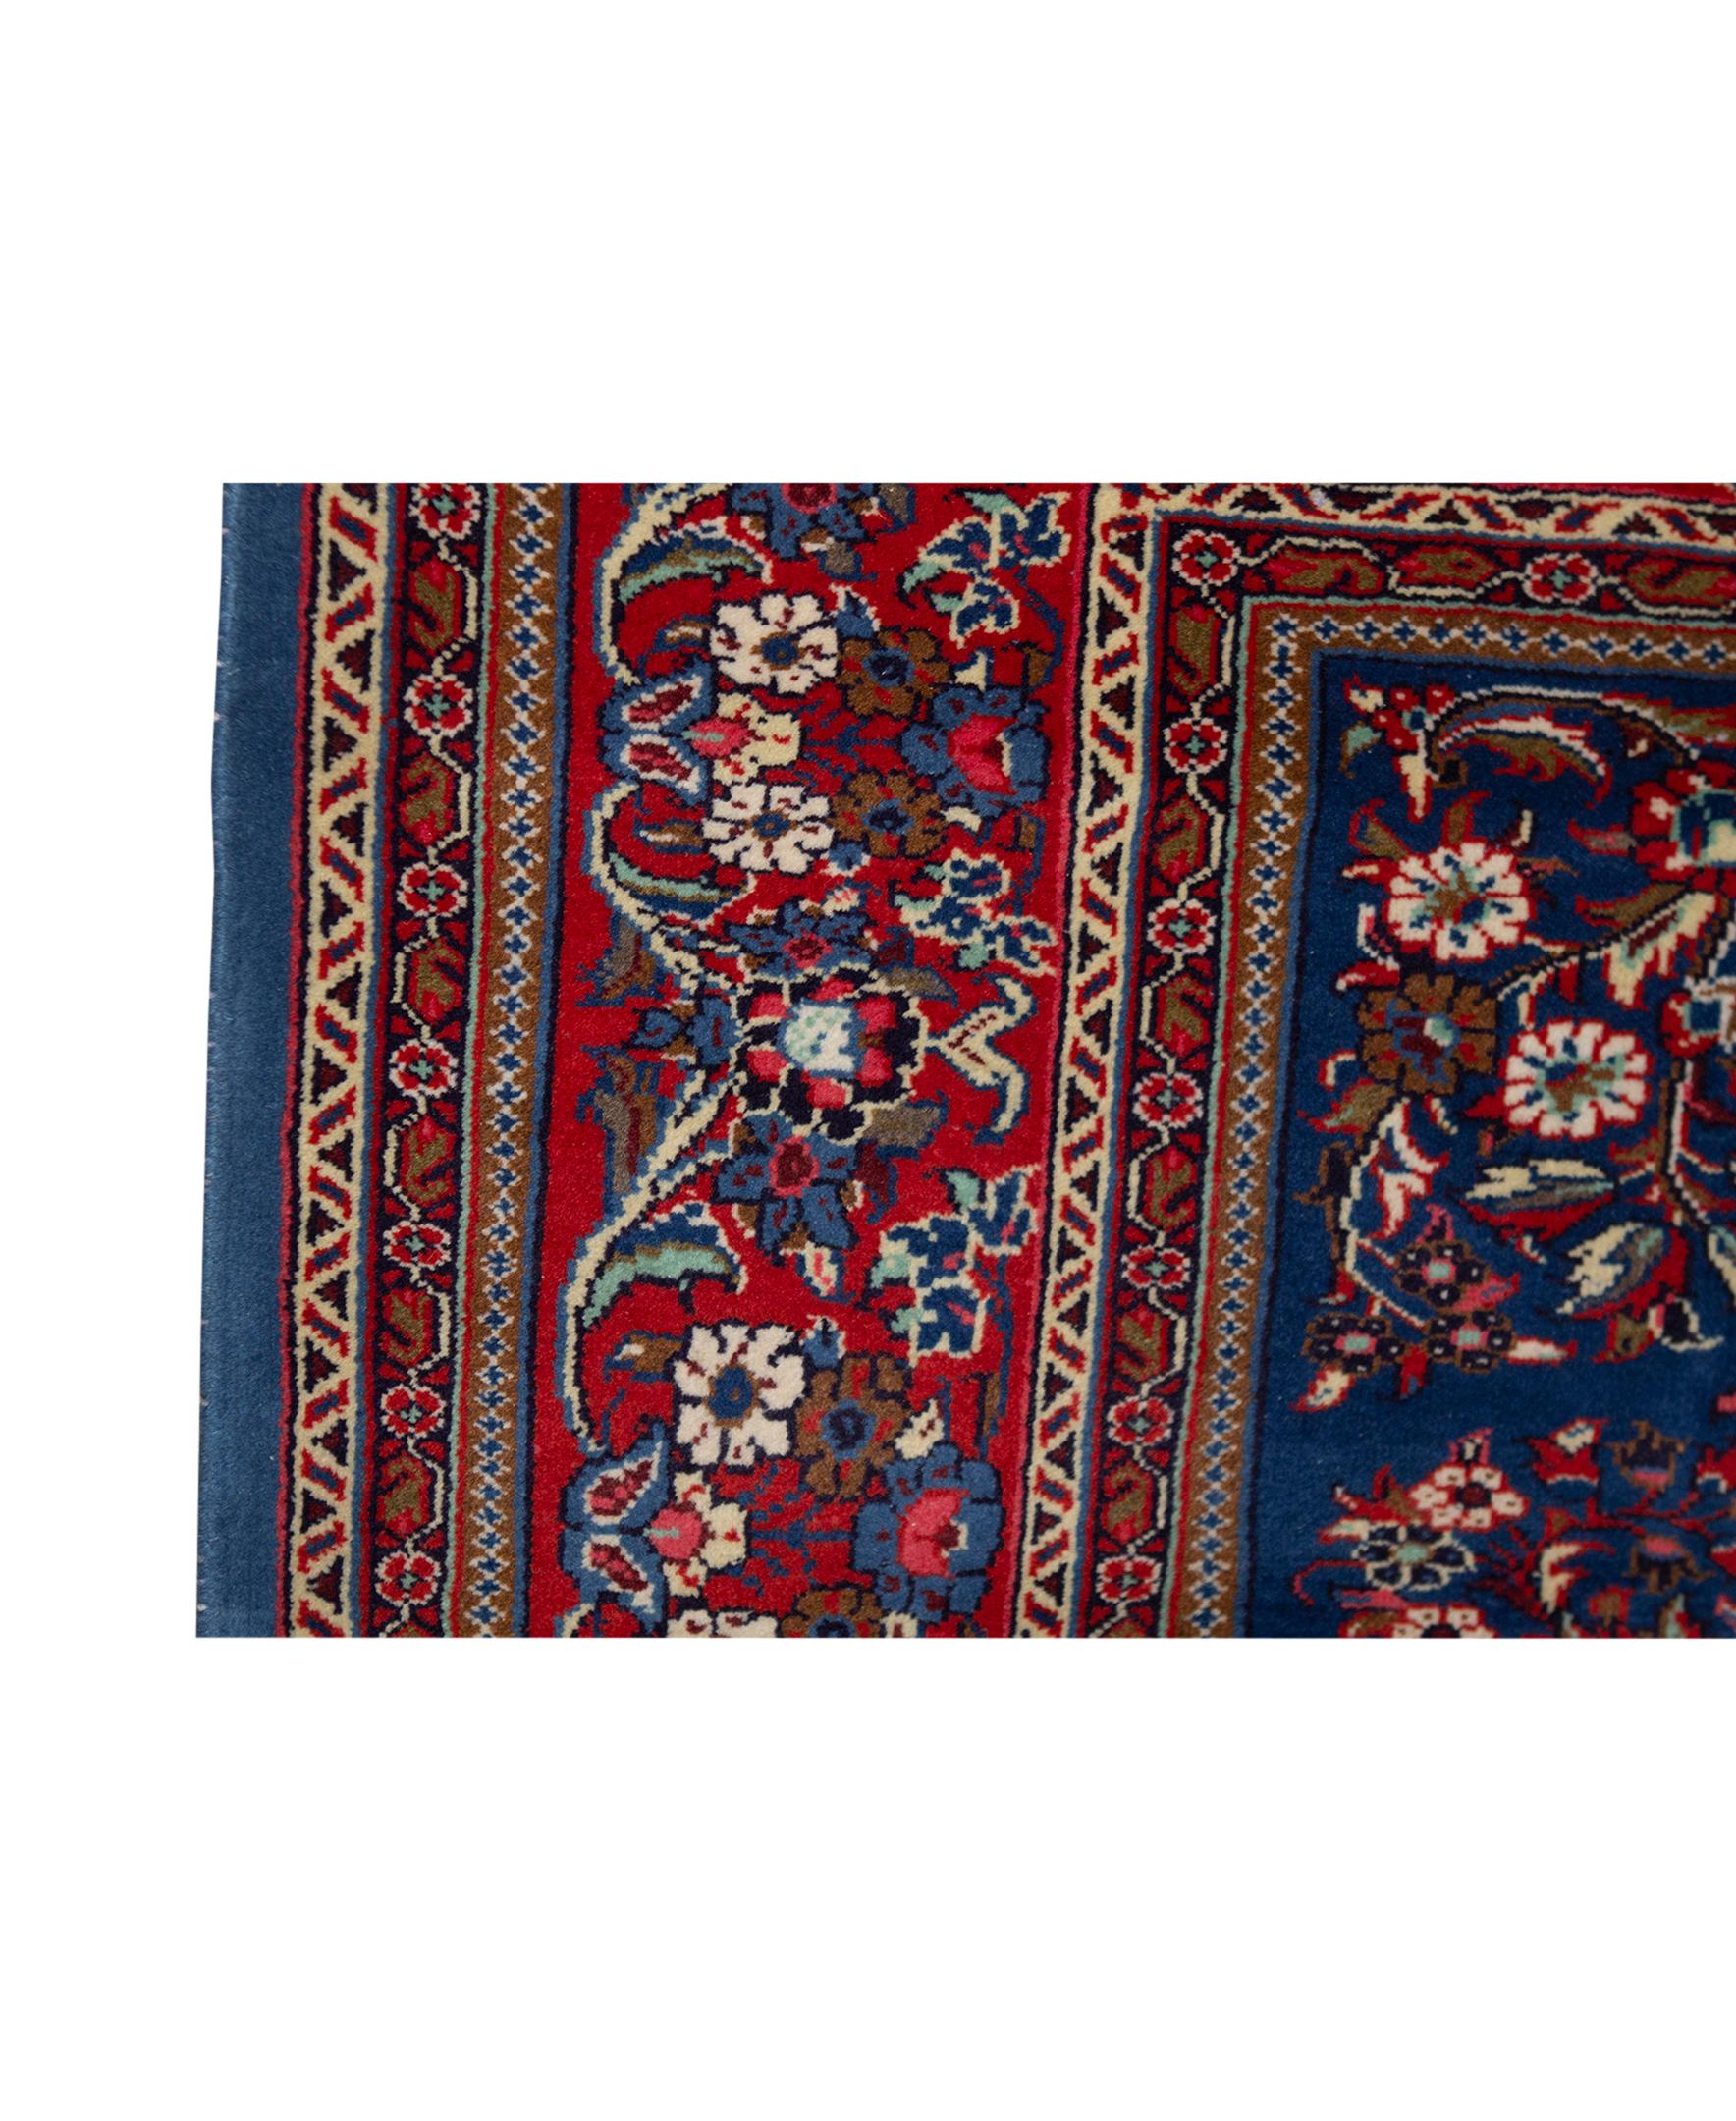   Antique Persian Fine Traditional Handwoven Luxury Wool Blue / Rust Rug. Size: 8'-4